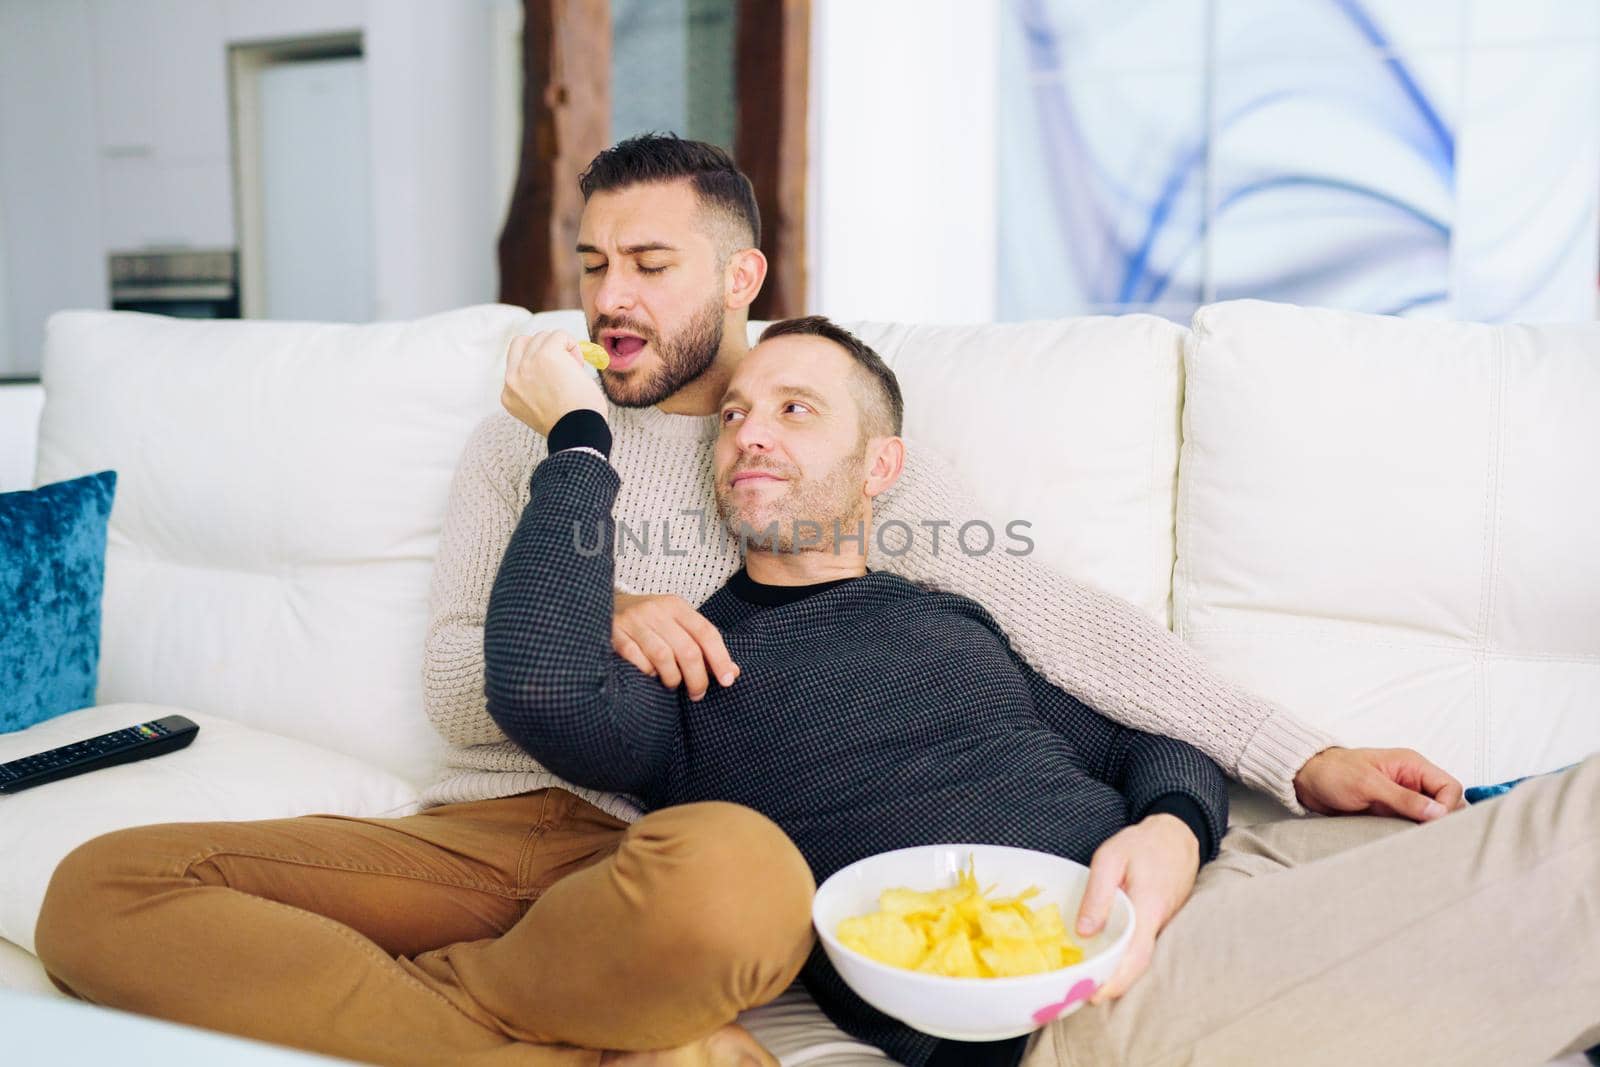 Gay couple sitting on the couch at home watching something on TV and having a snack. Homosexual relationship concept.